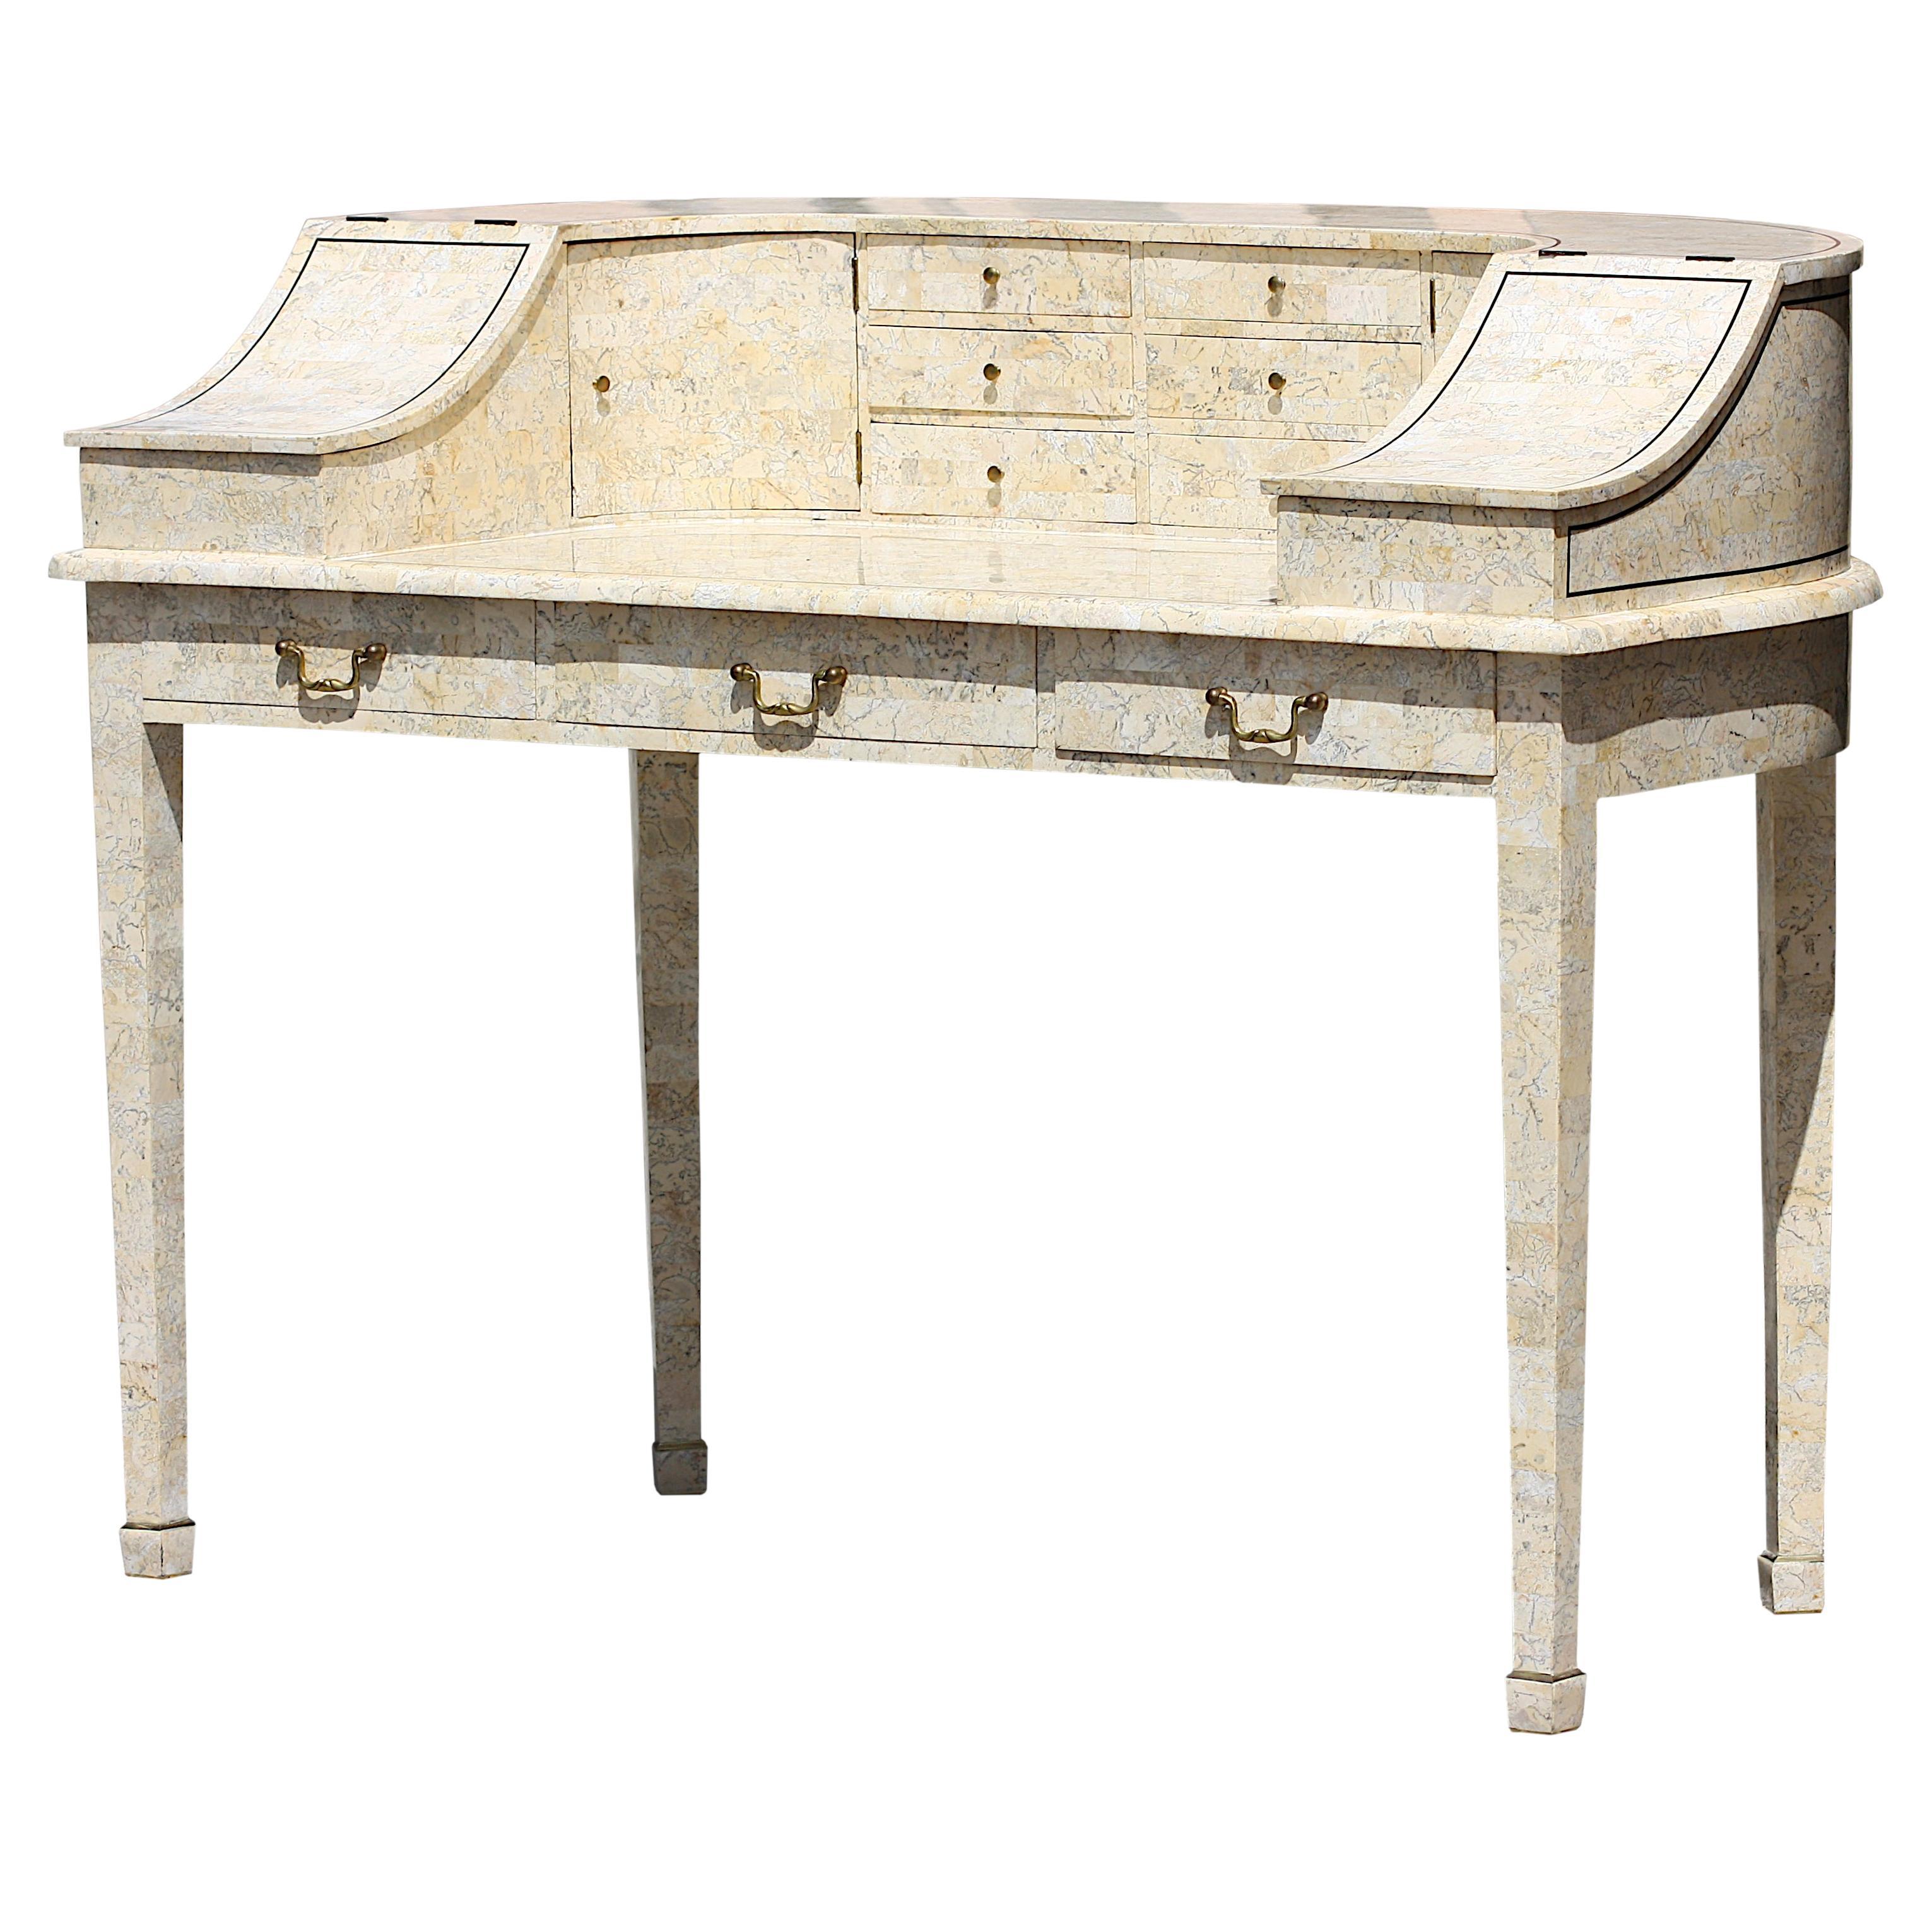 Contemporary Tessellated Stone Carlton House Desk For Sale